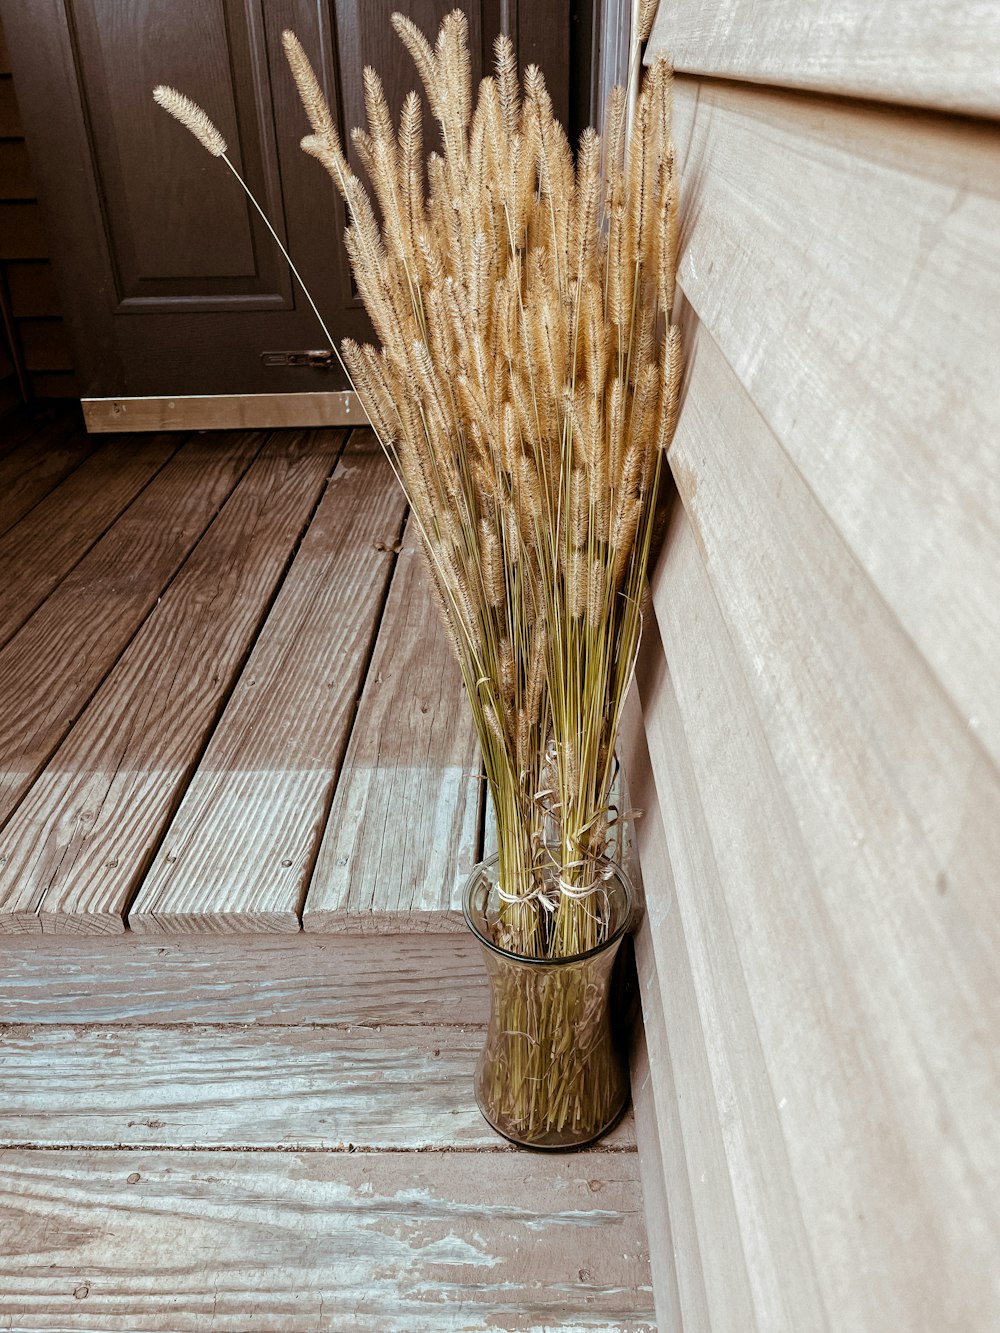 a vase filled with dry grass sitting on top of a wooden floor